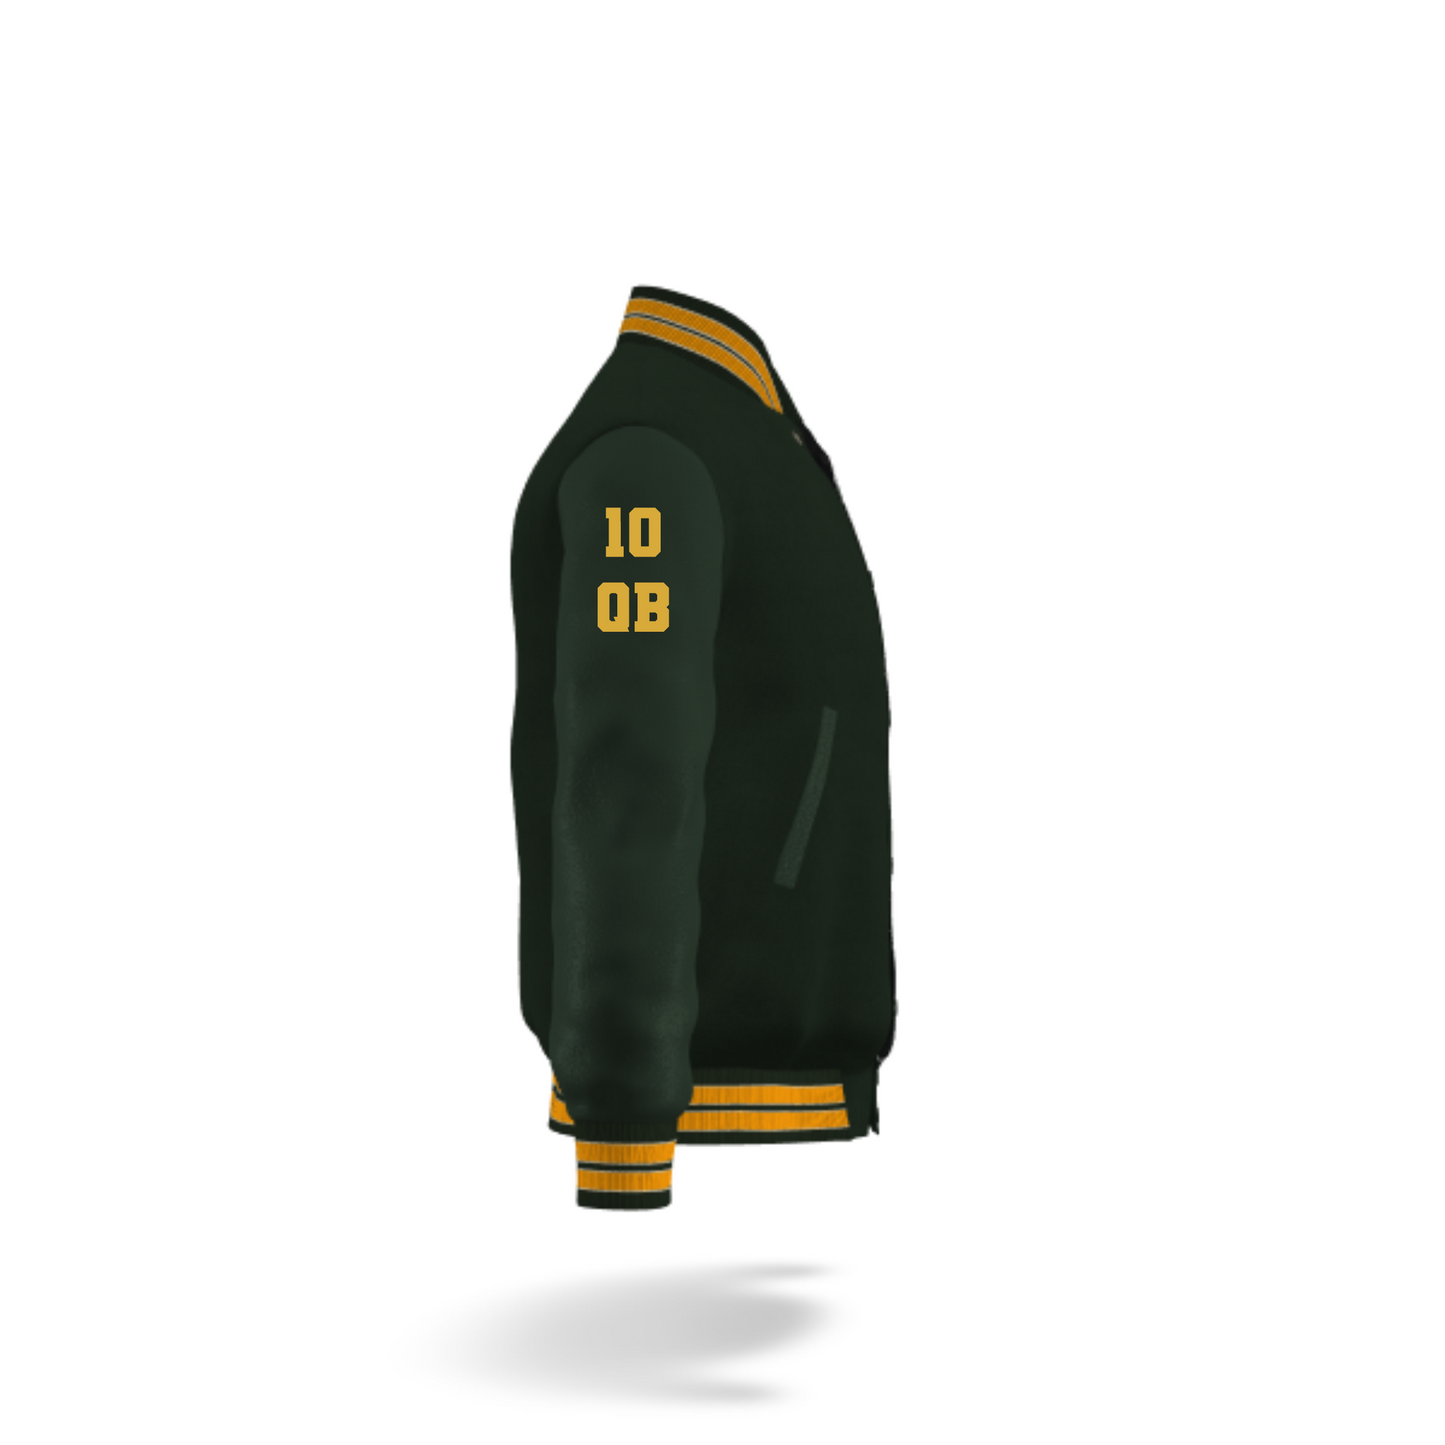 Emmaus Boy's Green Varsity Jacket with Green Leather Sleeves